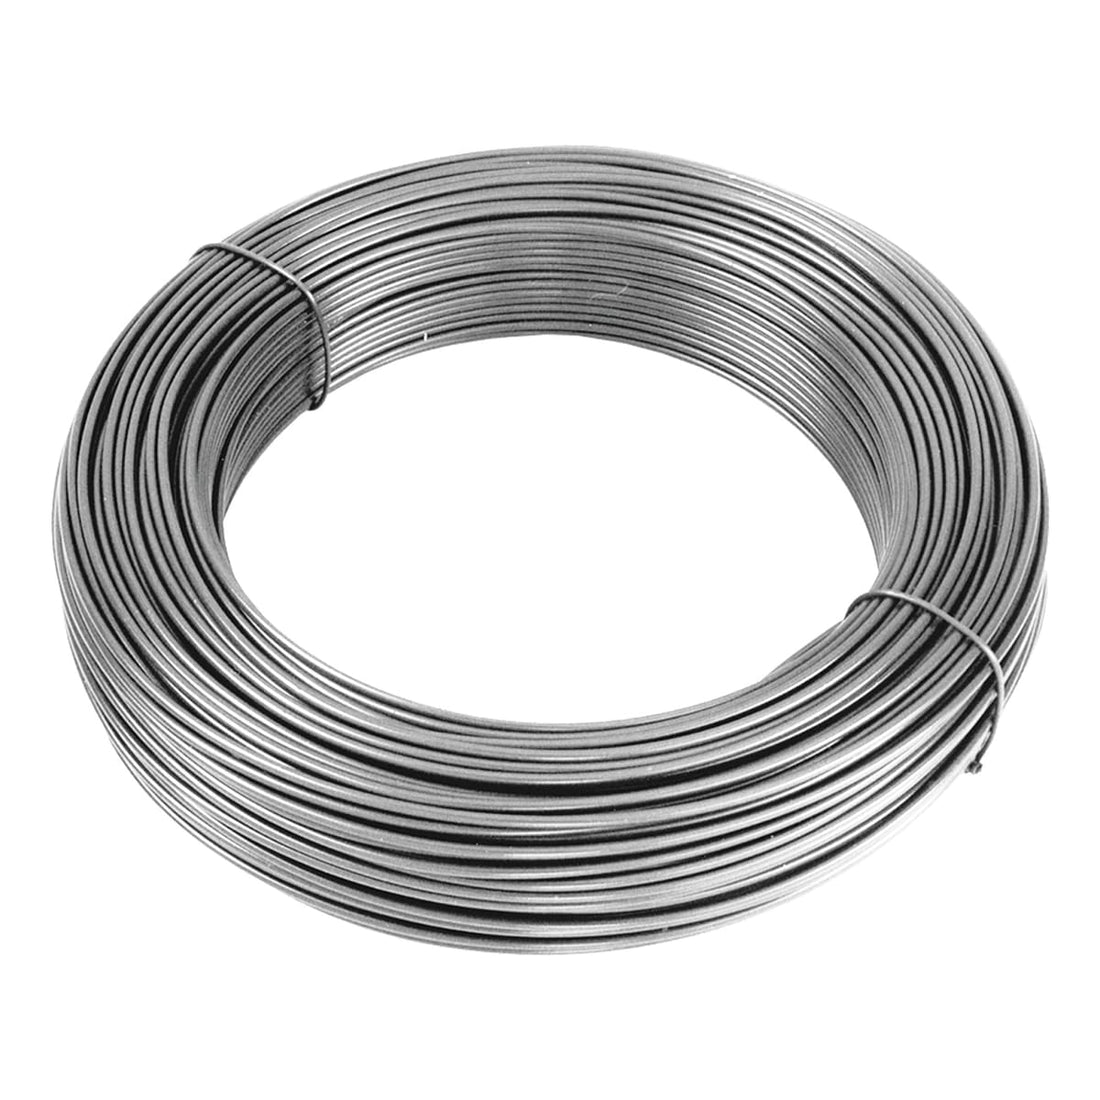 GALVANISED METAL WIRE 0.7 MM THICK 50 M - best price from Maltashopper.com BR500004666